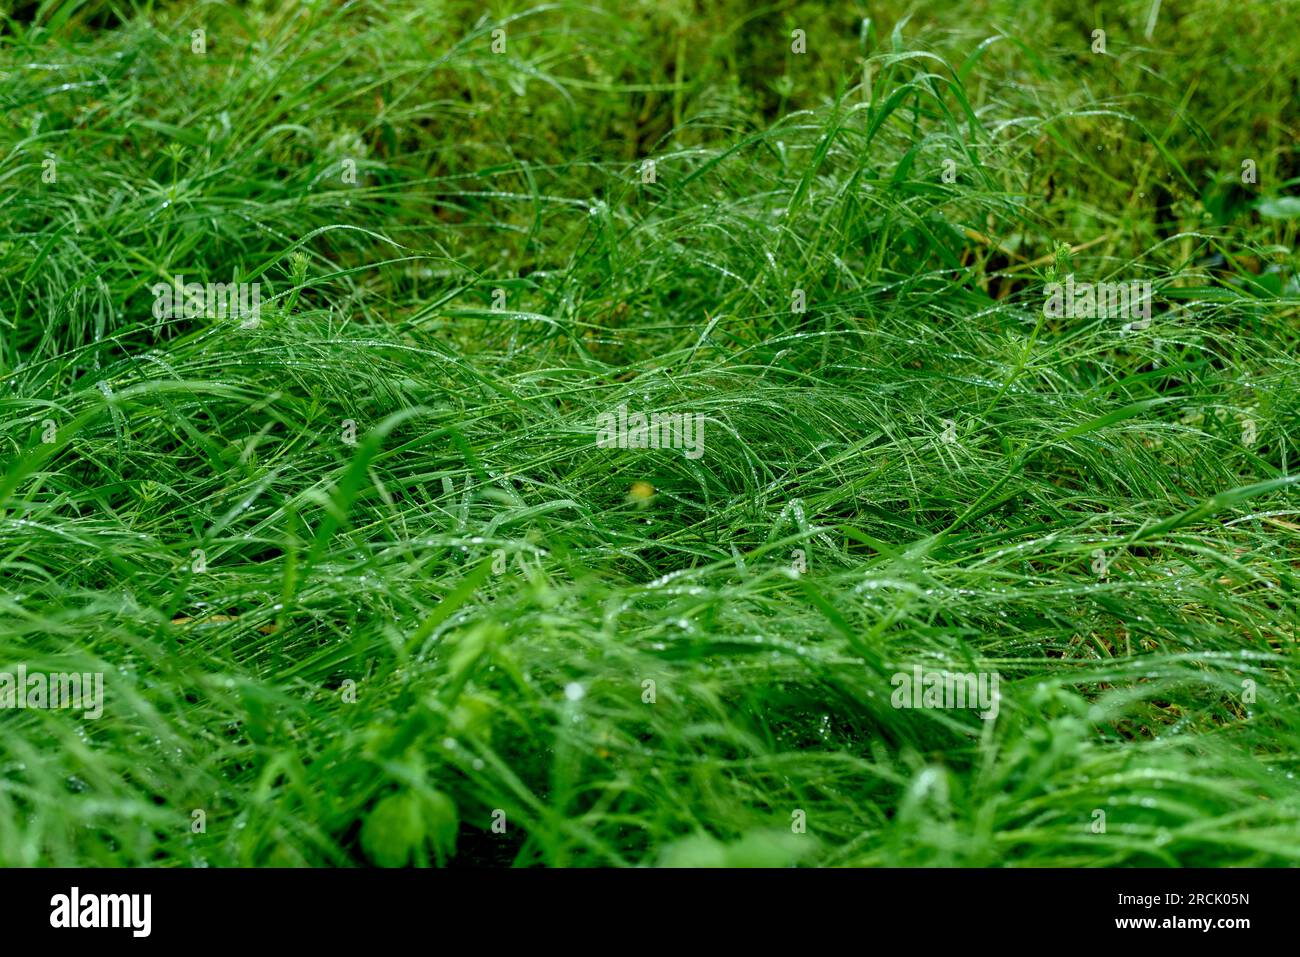 Green grass leafs, flowers and plants with dew drops after raining. Stock Photo